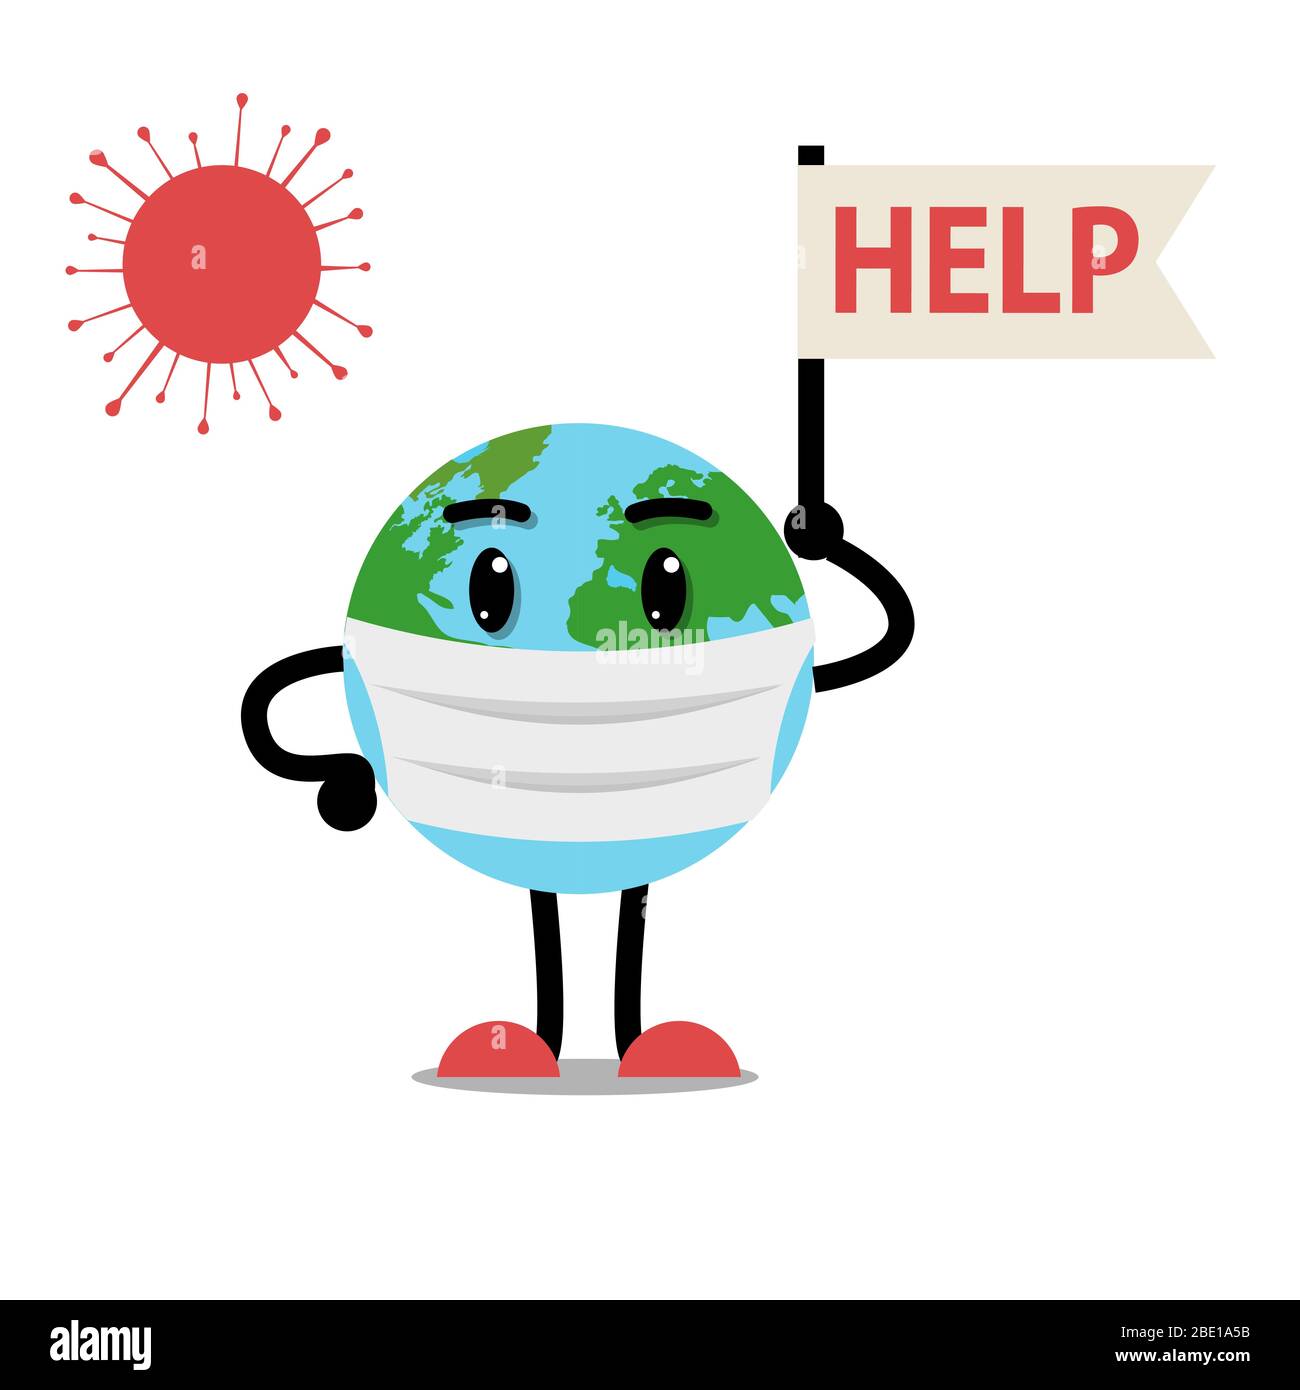 Sad Earth planet ask help character on a medical mask.Vector flat style illustration icon design. Isolated on white background. Eco friendly,save ecol Stock Vector